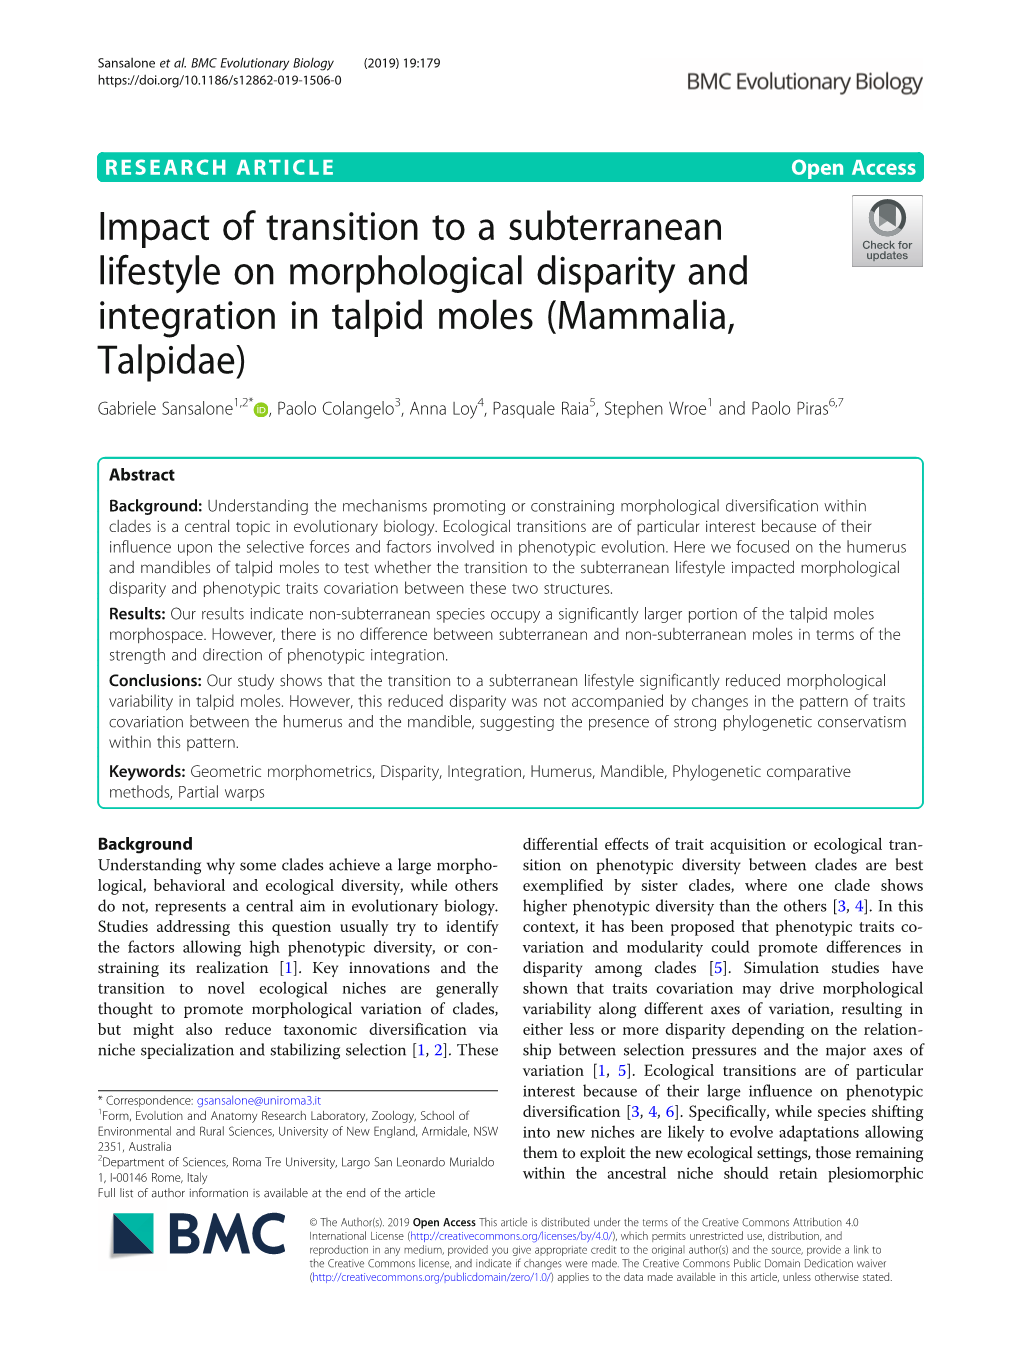 Impact of Transition to a Subterranean Lifestyle on Morphological Disparity and Integration in Talpid Moles (Mammalia, Talpidae)